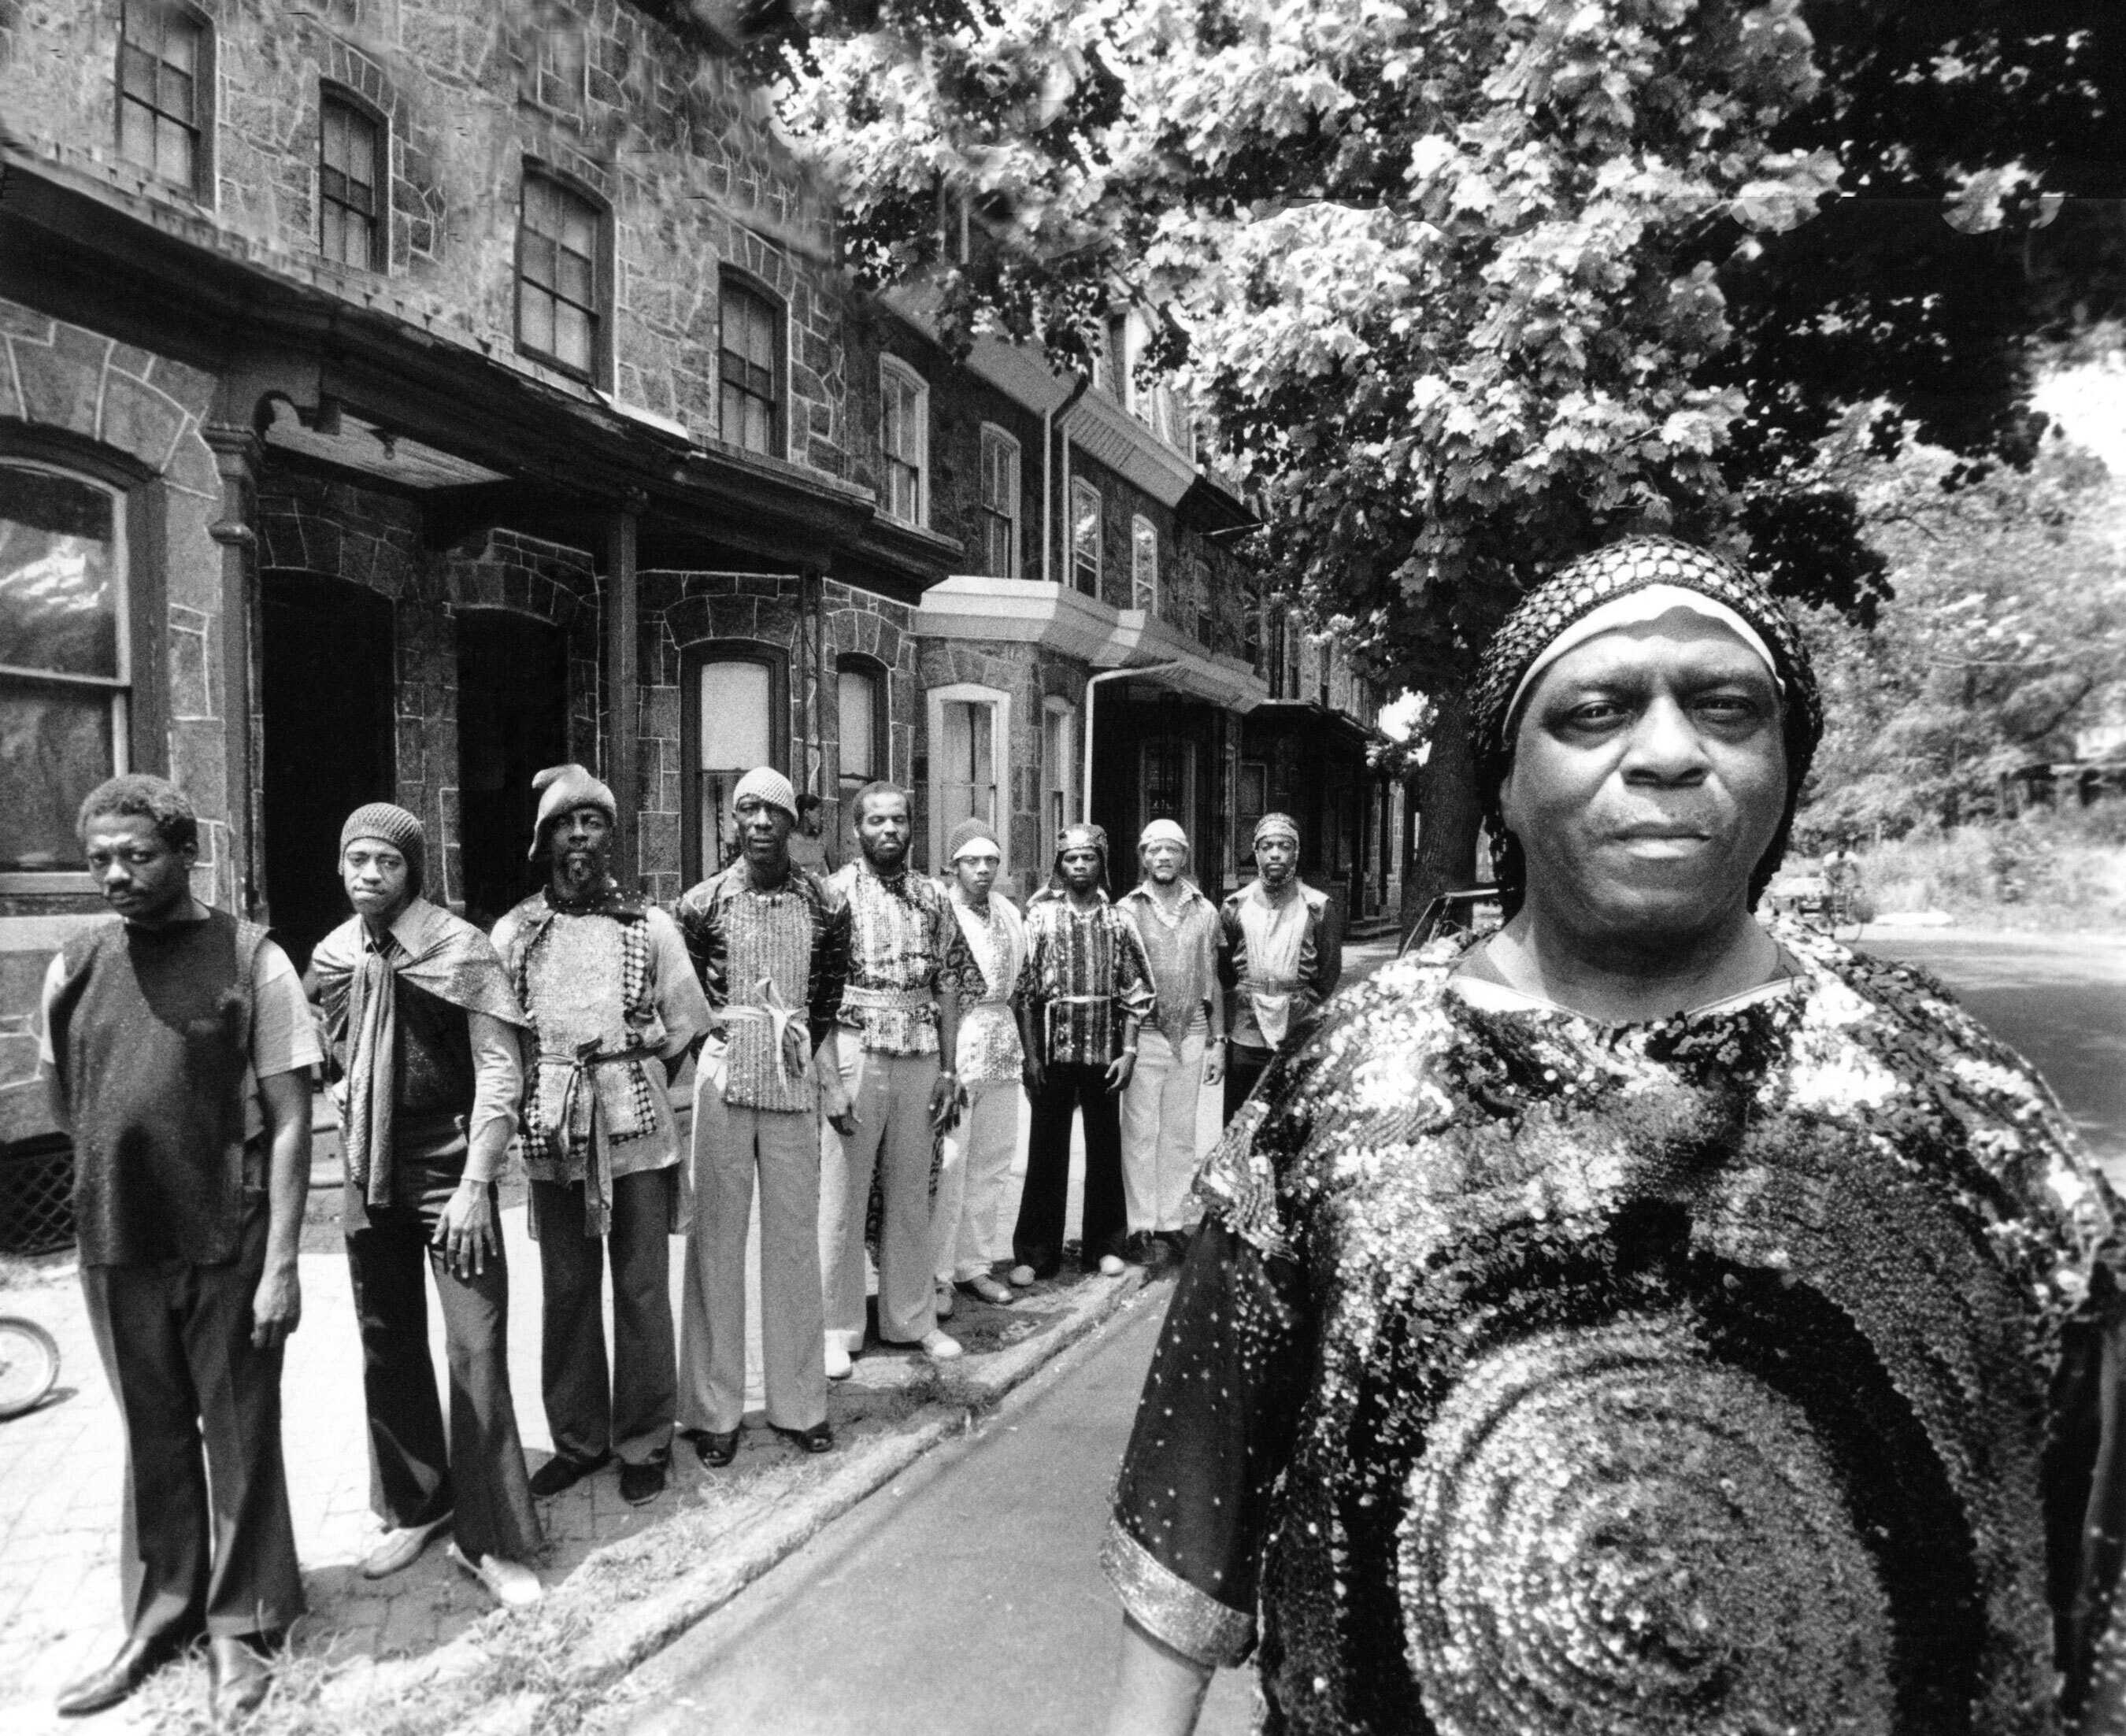 Sun Ra poses in front of his row house in the Philadelphia suburb with some of his Arkestra members.